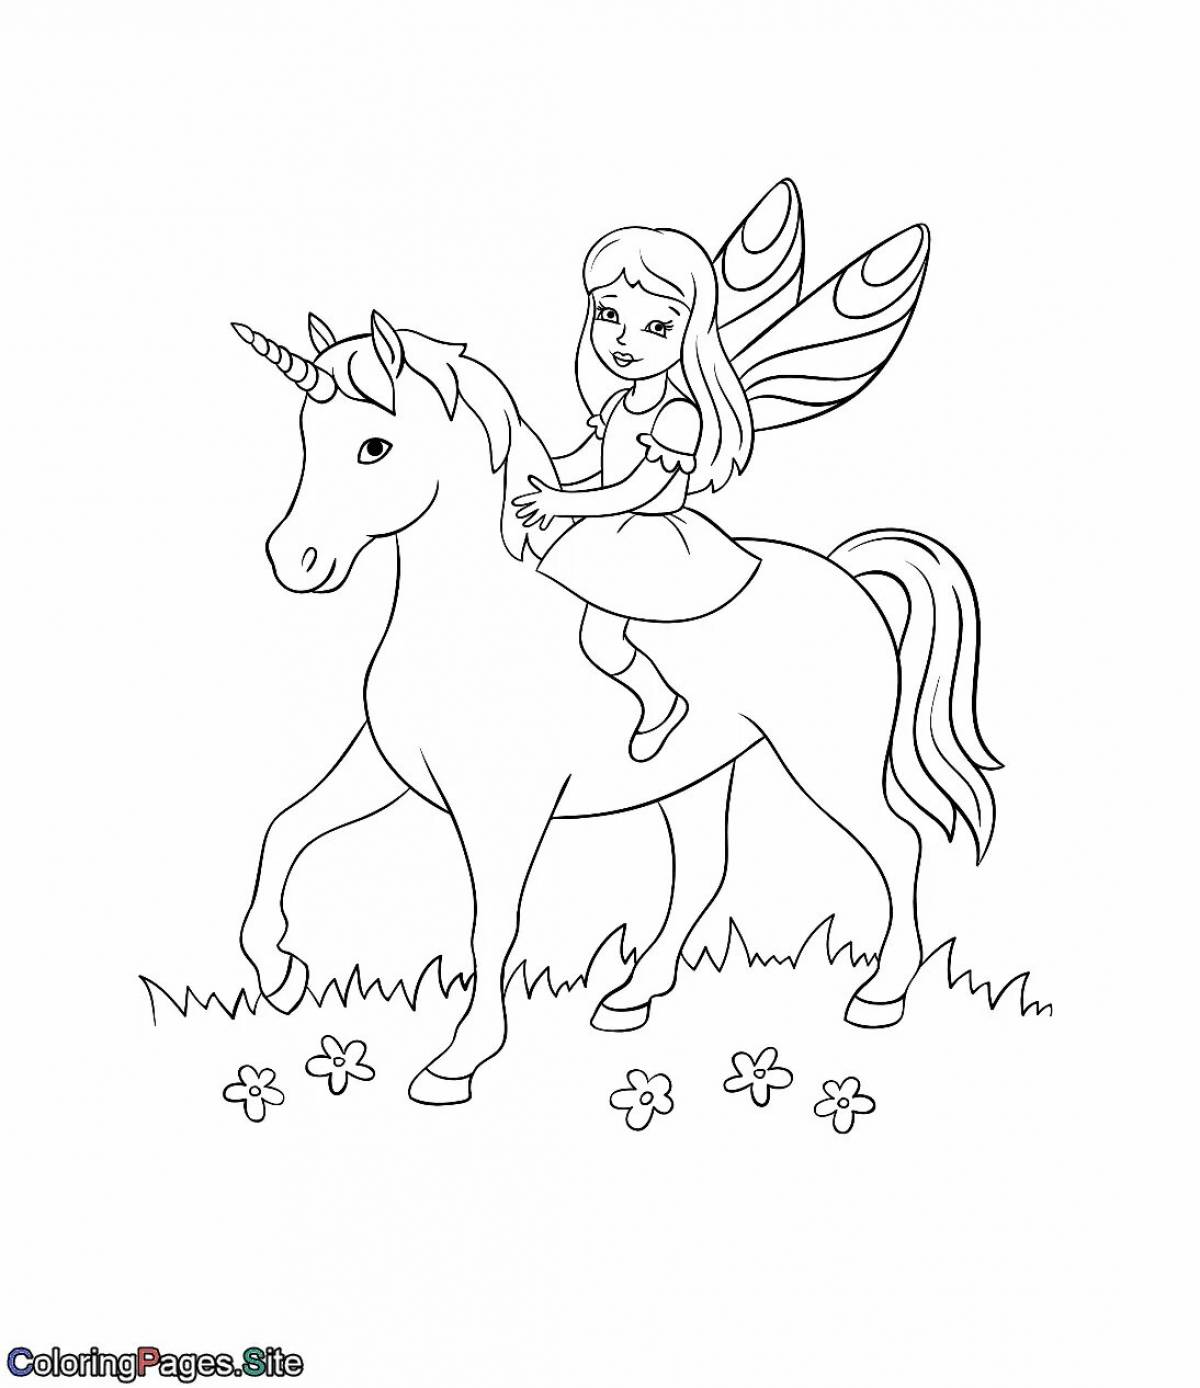 Fun coloring pages fairies and unicorns